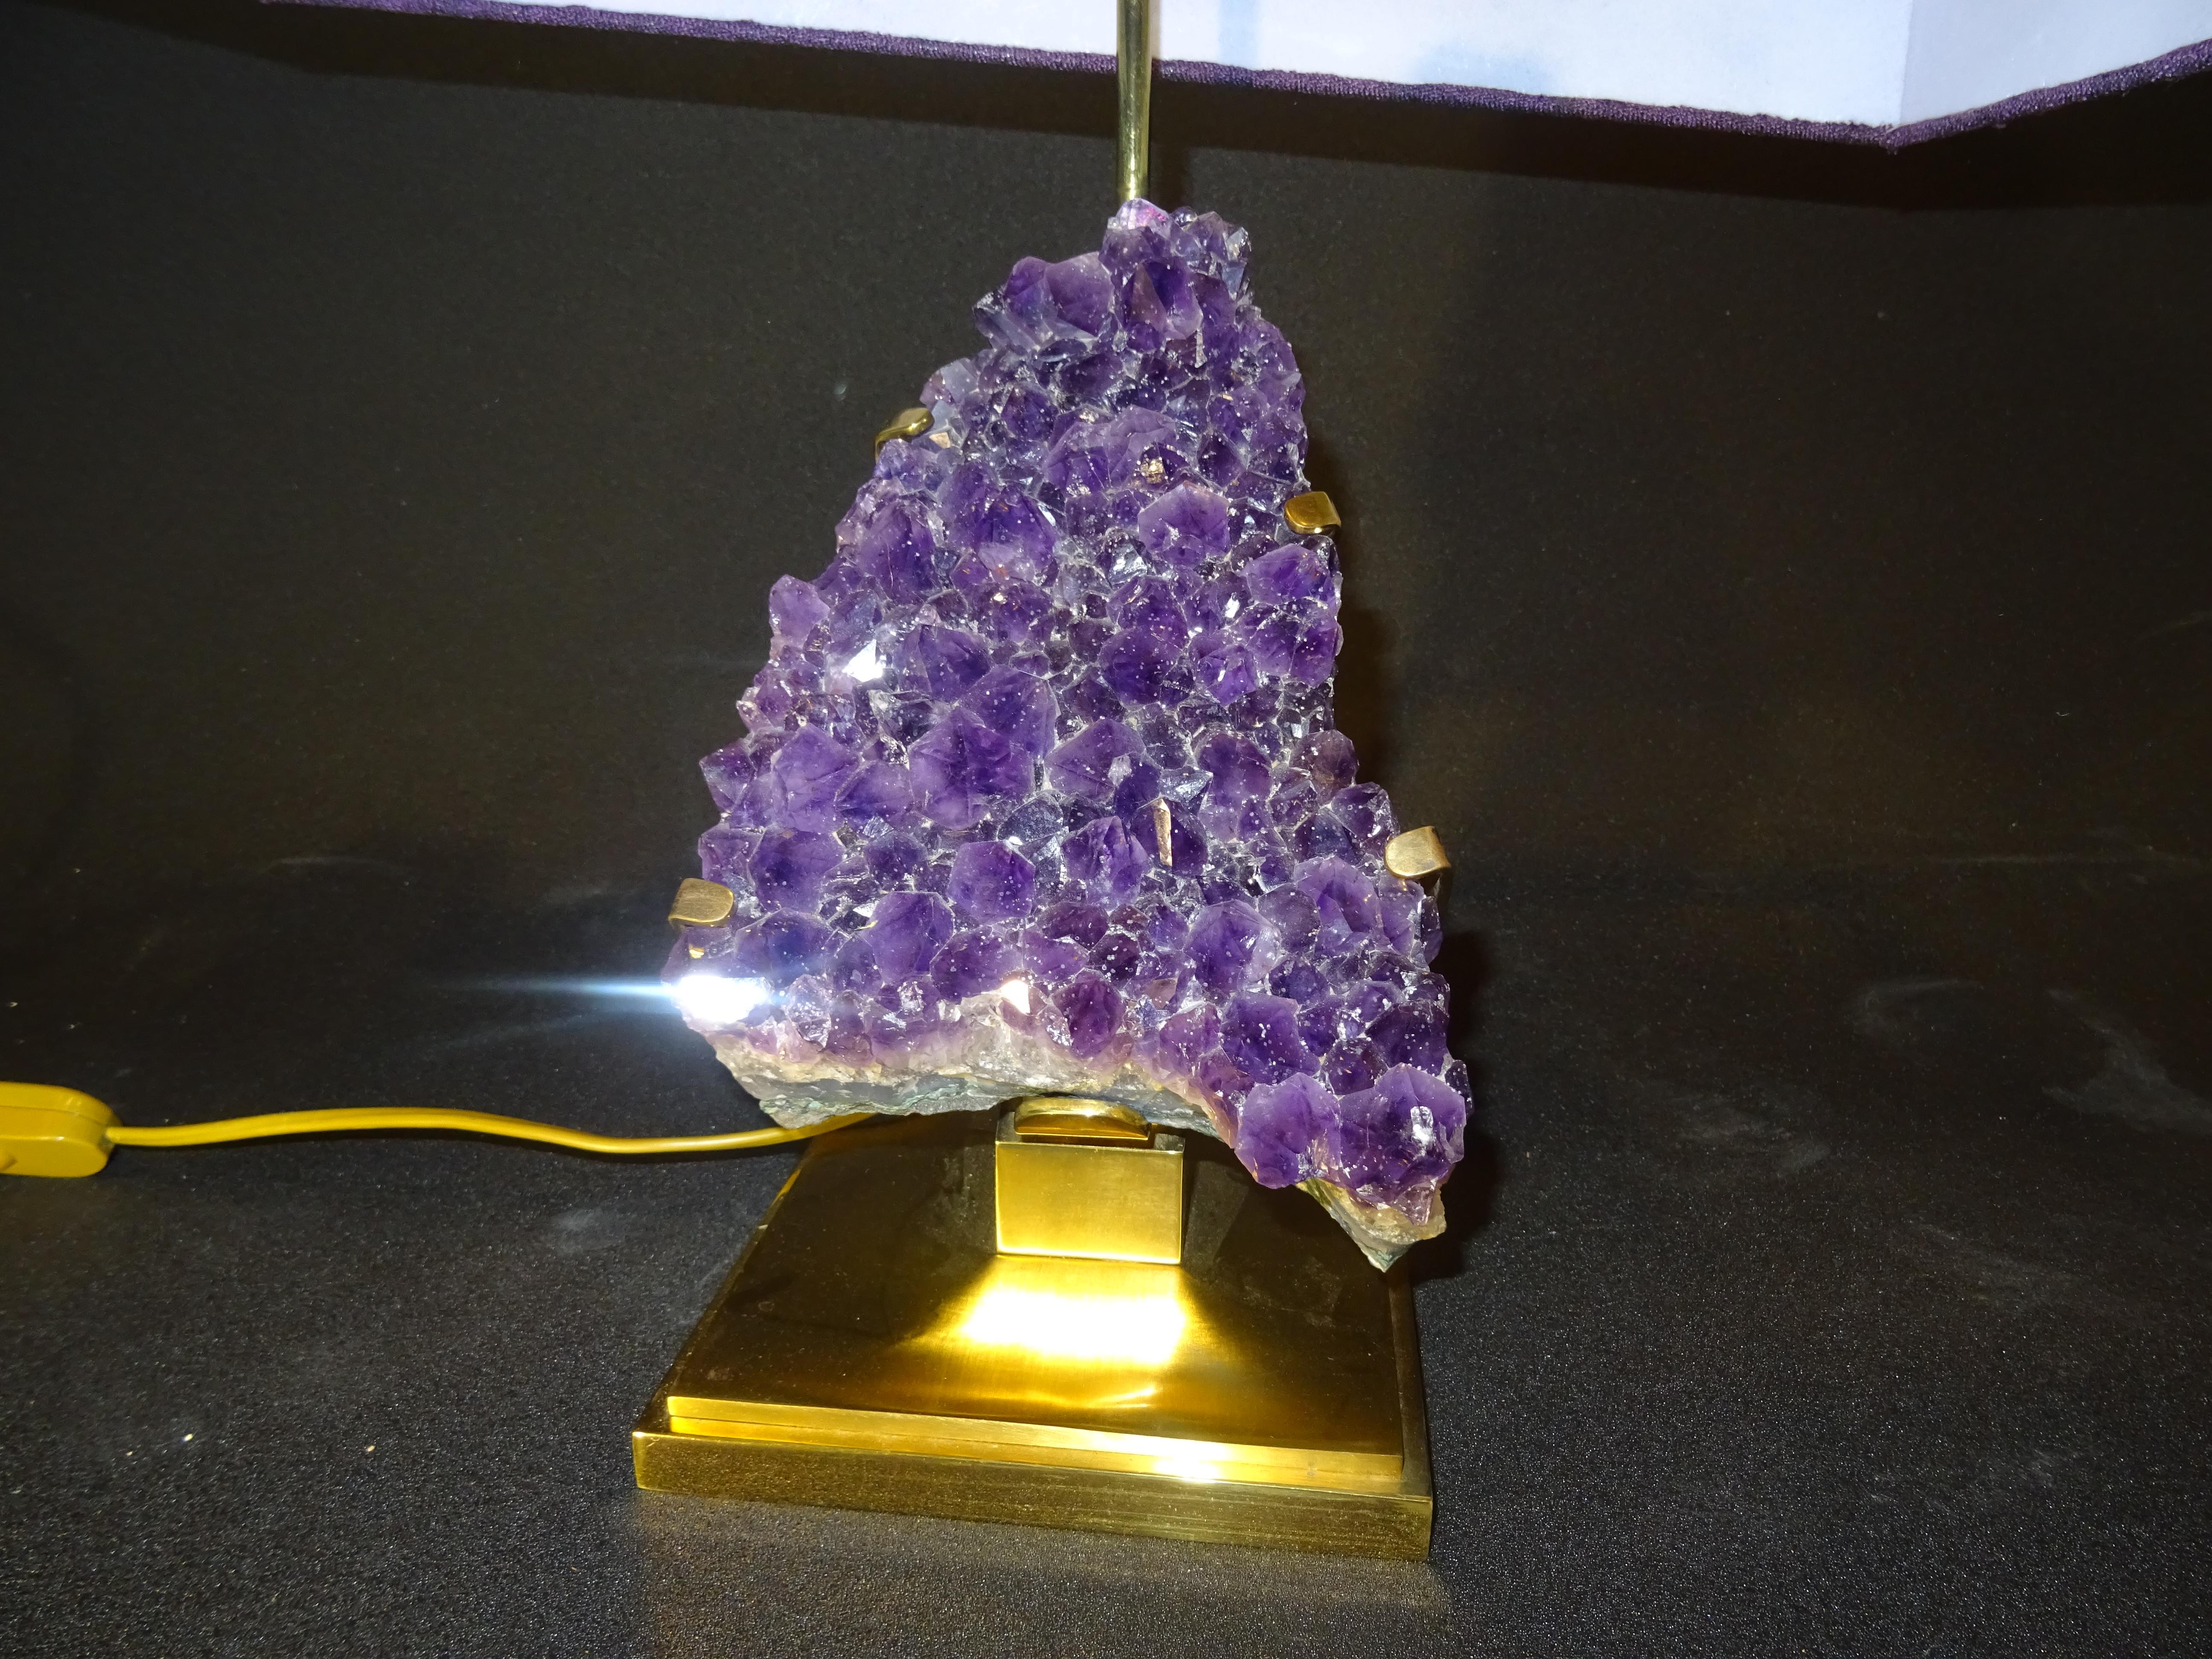 Stunning Willy Daro Amethyst and brass adjustable table lamp, circa 1970, new amethyst color screen.
Its in a very good condition with age and use. It was purchased in a private collection.
The piece of amethyst is absolutely gorgeous !!!!! It